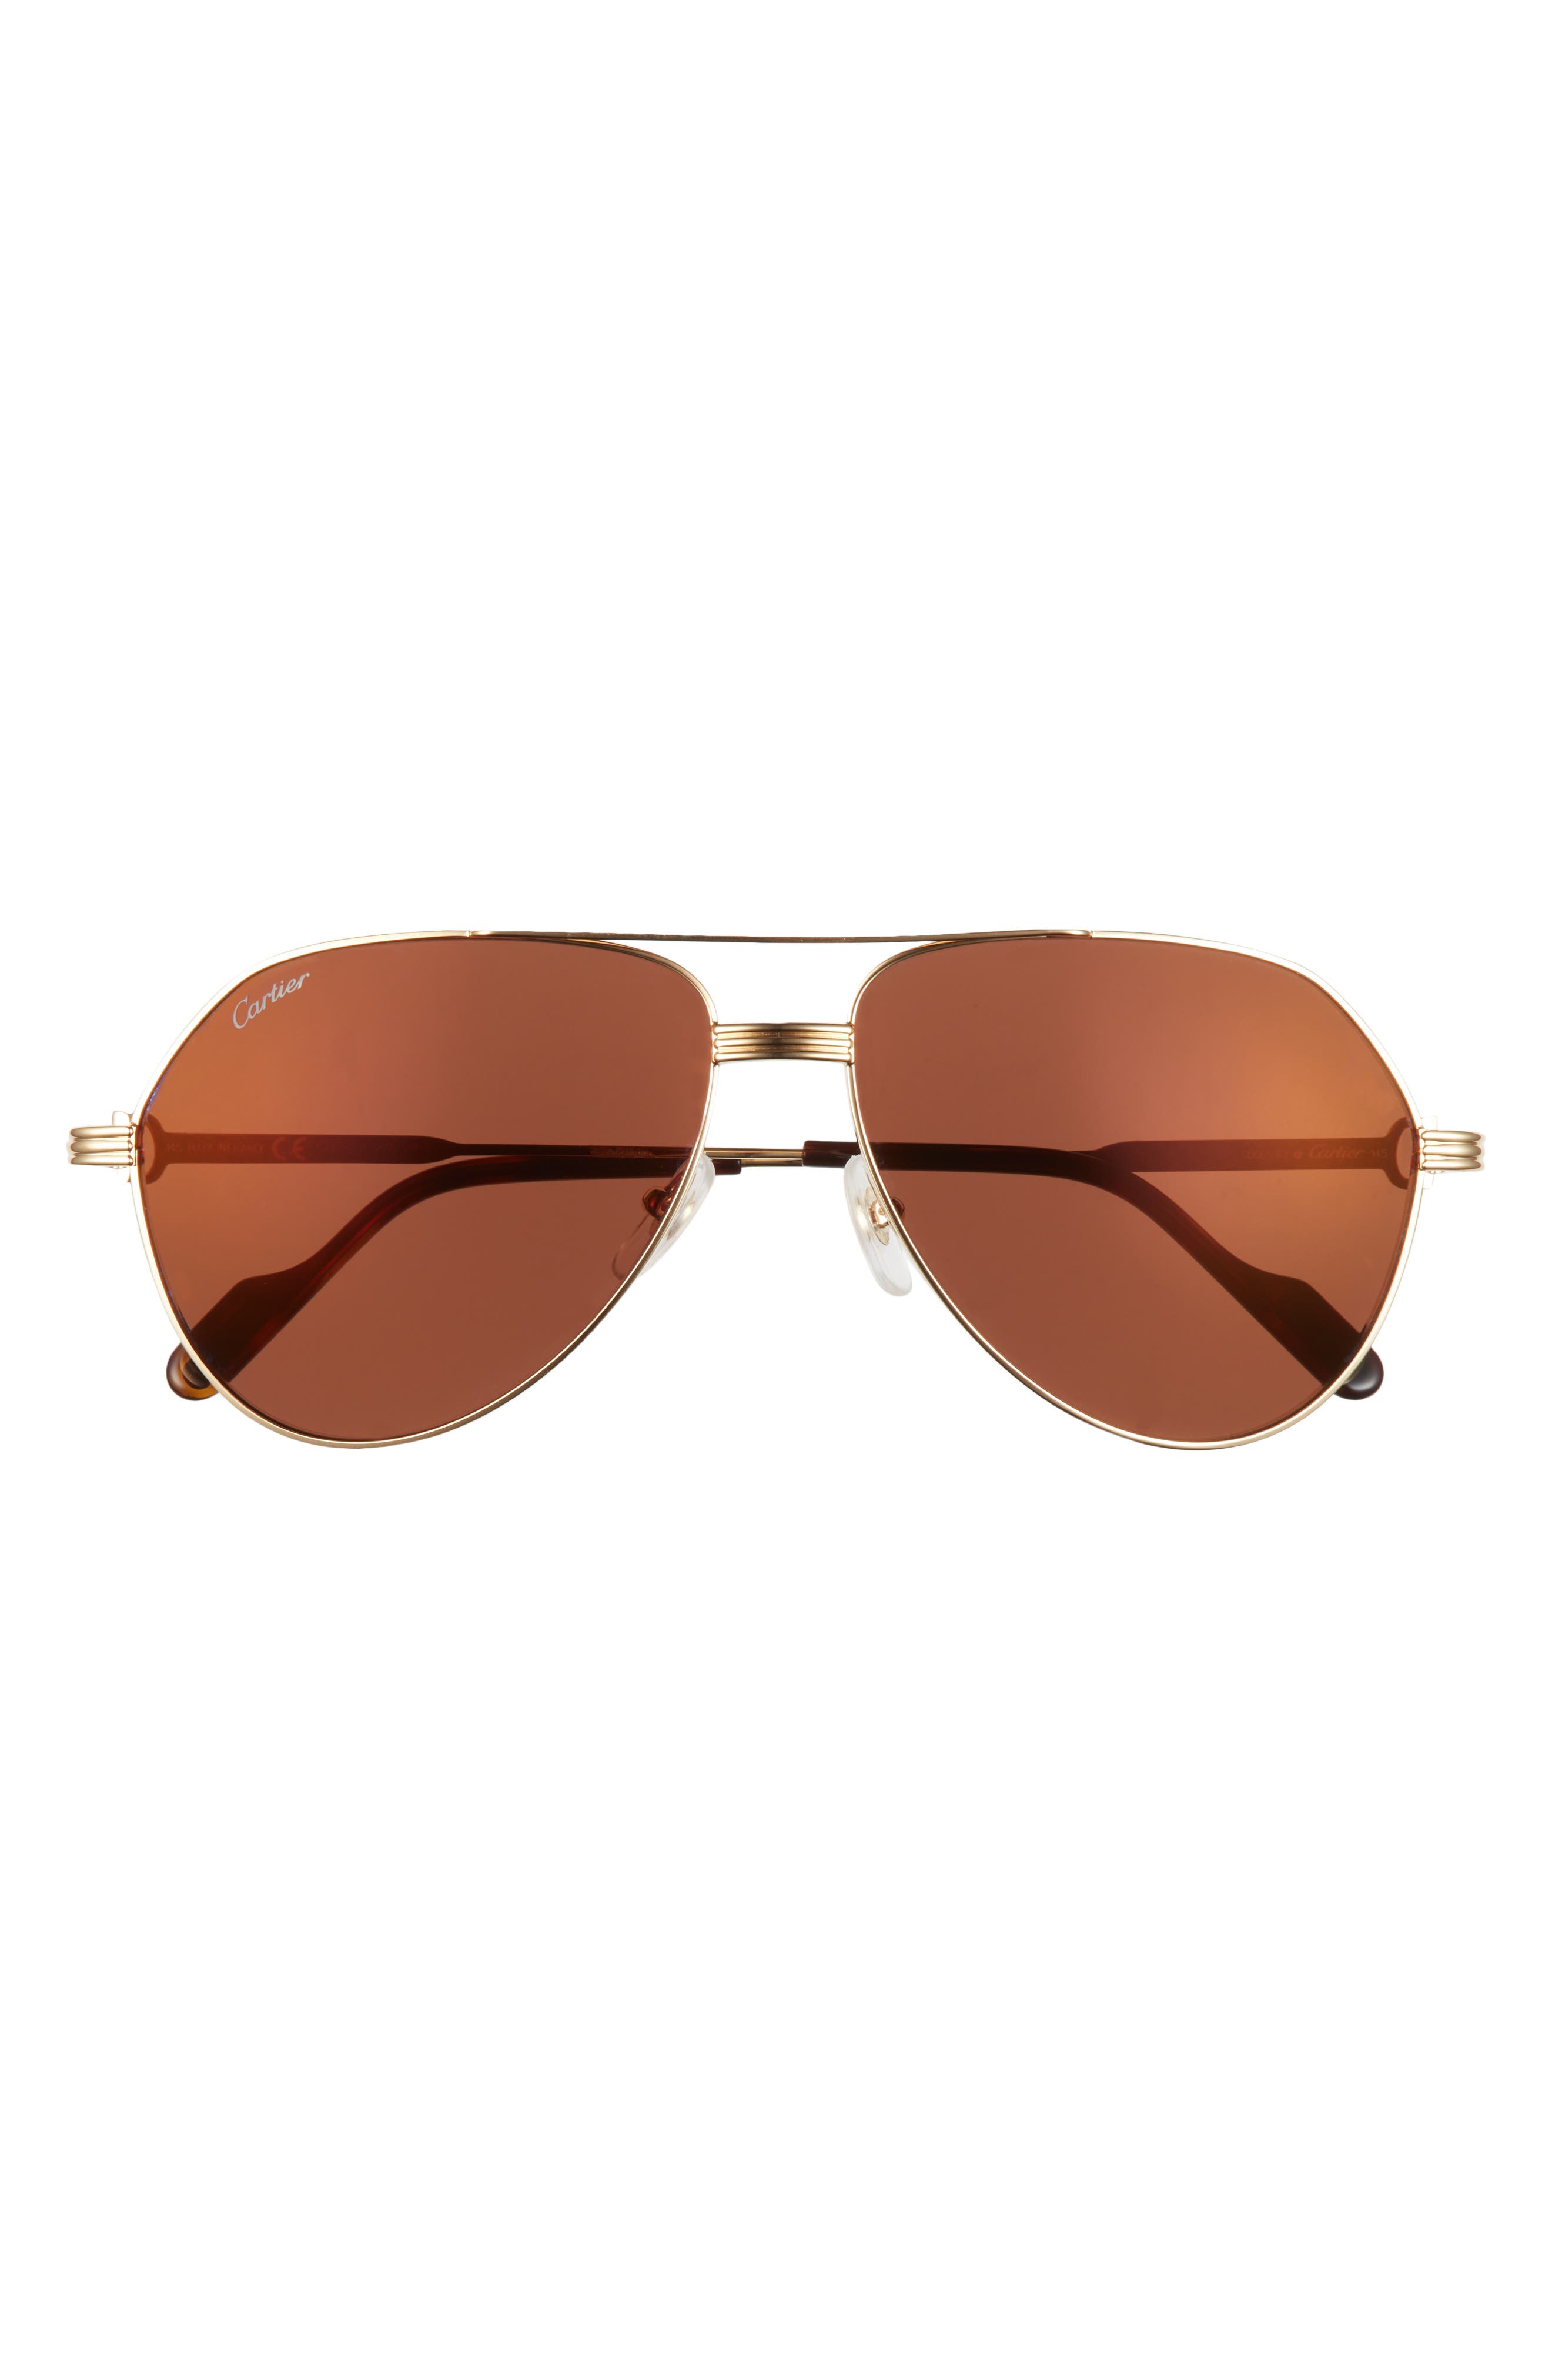 Cartier 61mm Aviator Sunglasses in Gold at Nordstrom